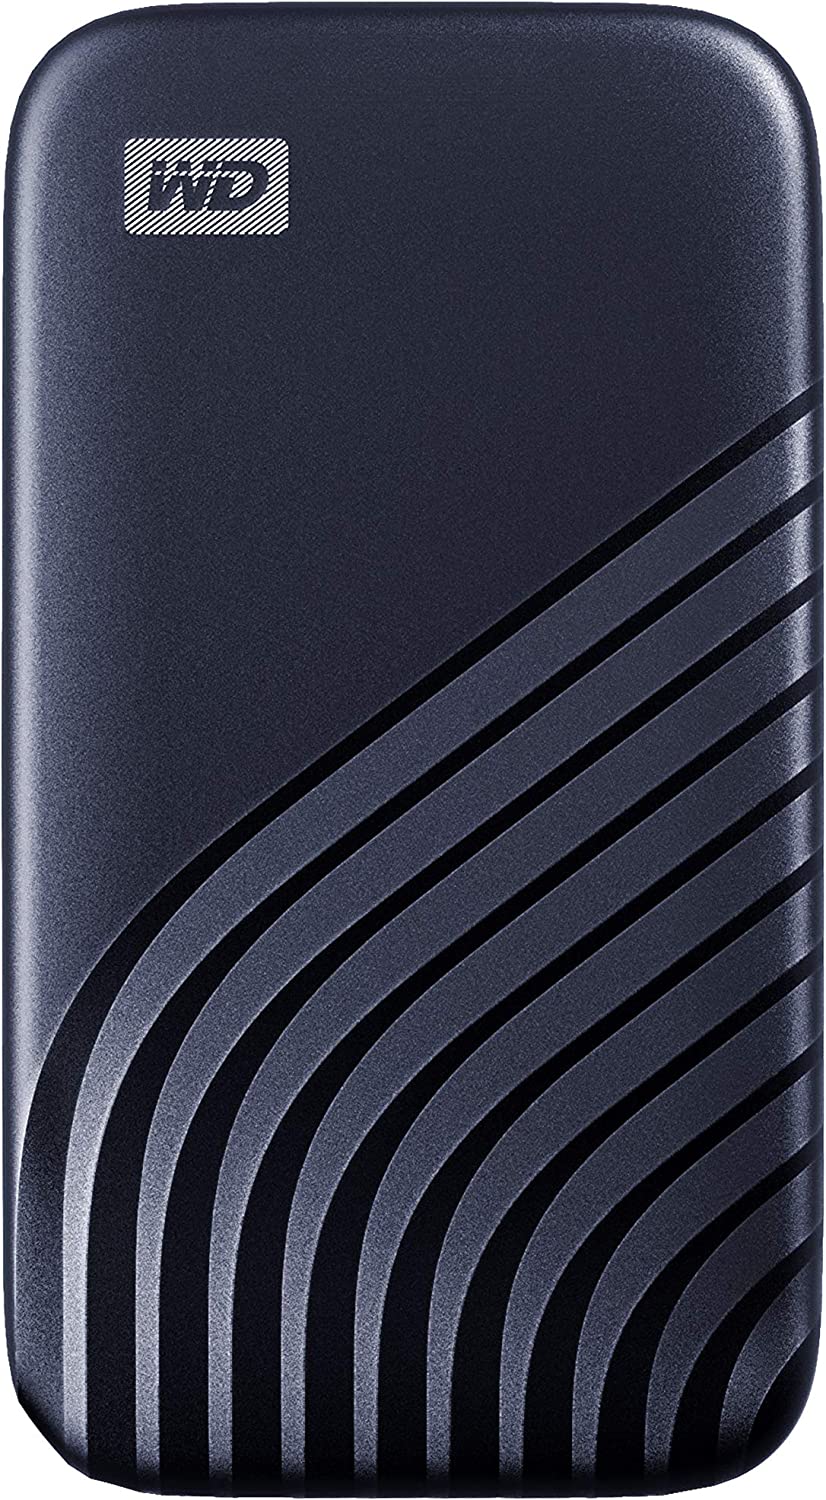 2TB WD My Passport Portable Solid State Drive (Various Colors) $138 + Free Shipping